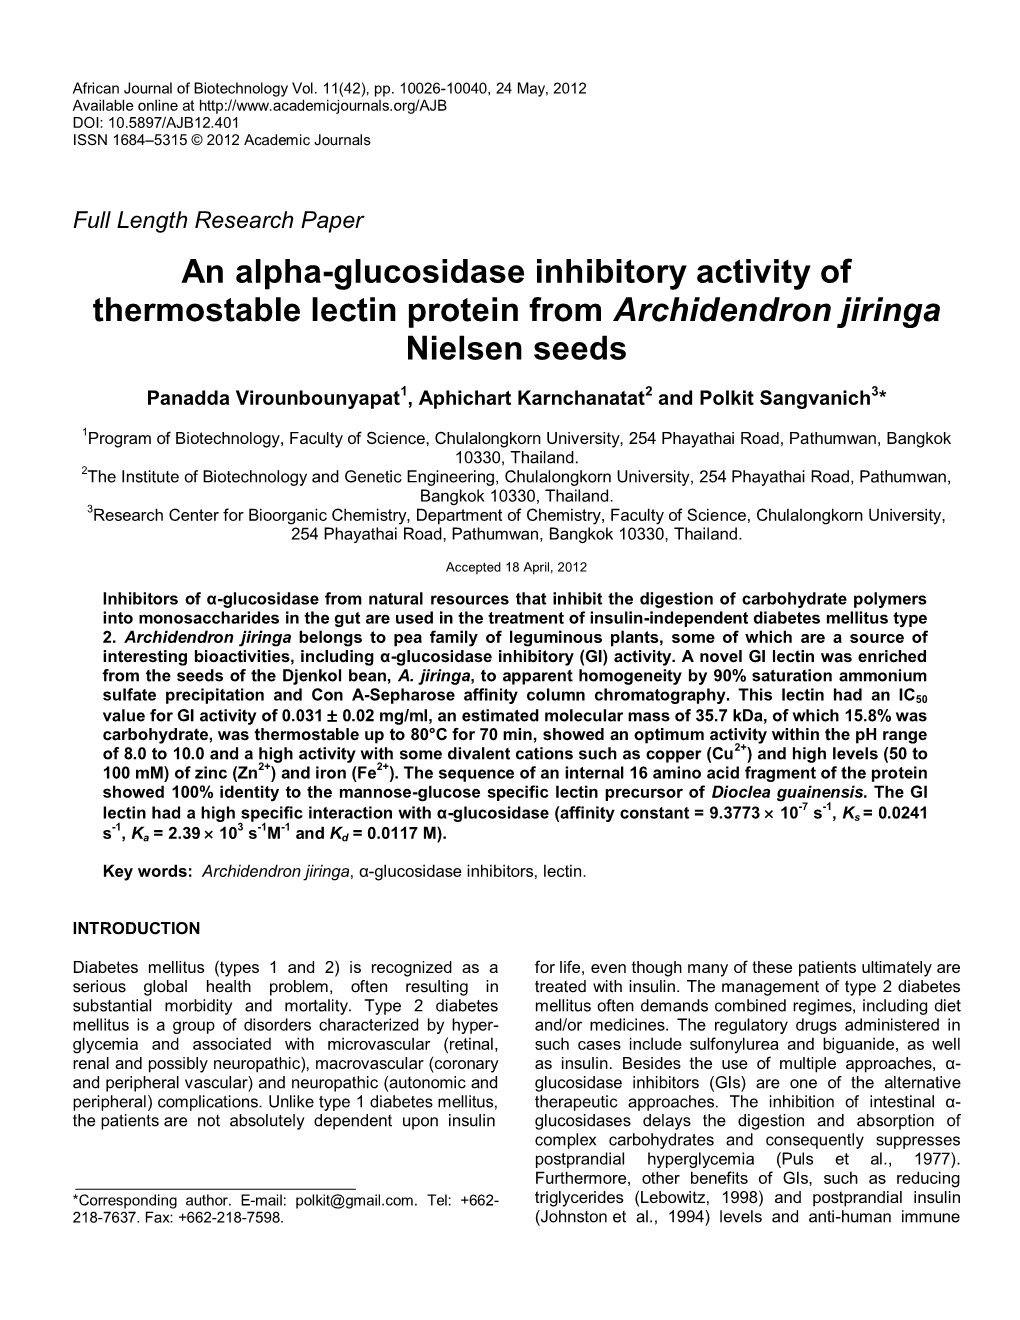 Glucosidase Inhibitory Activity of Thermostability Lectin Protein From